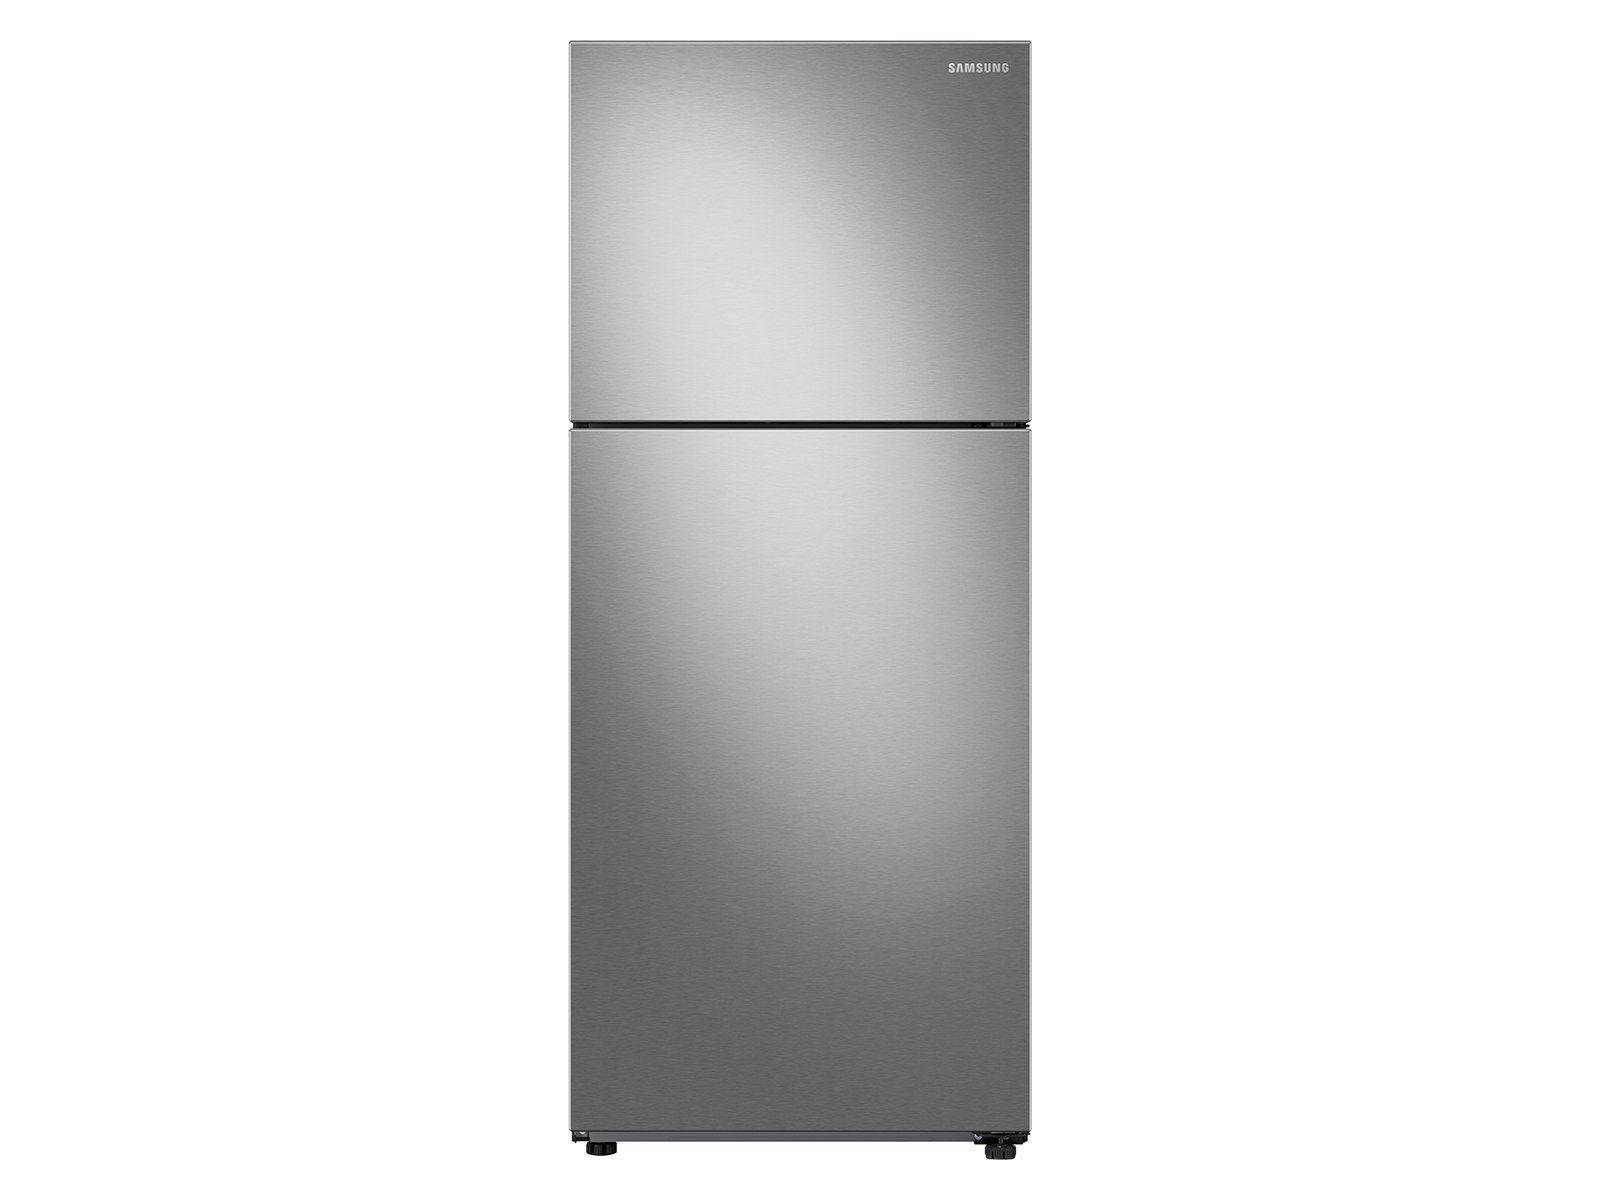 Samsung 15.6 cu. ft. Top Freezer Refrigerator with All-Around Cooling in Black(RT16A6195SR/AA)